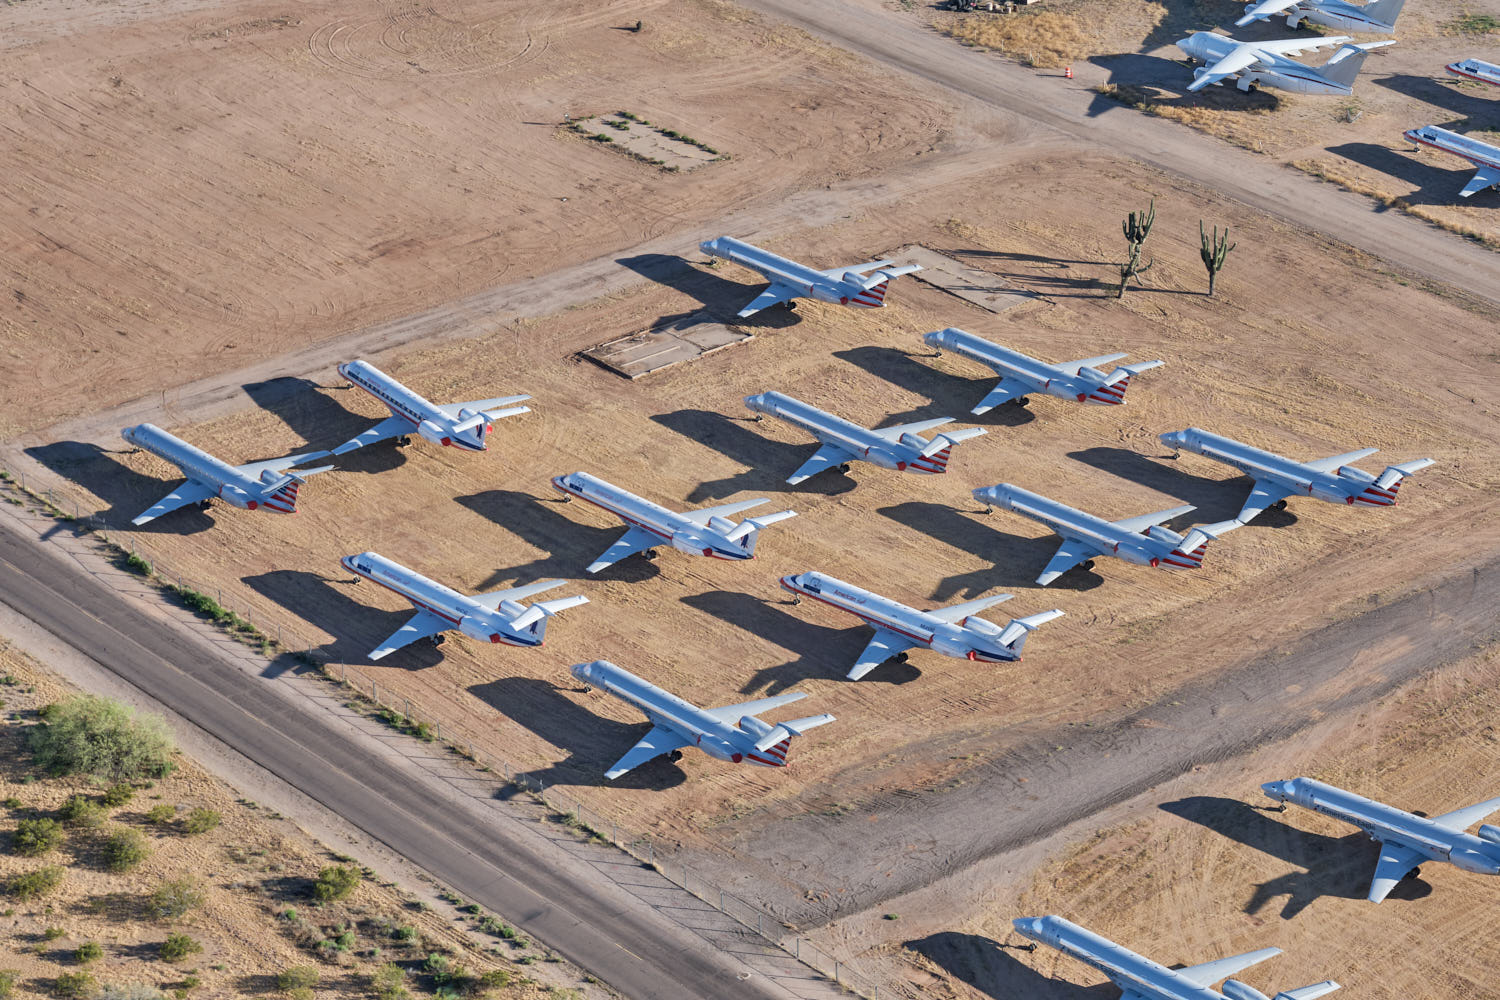 airplanes parked on a dirt field